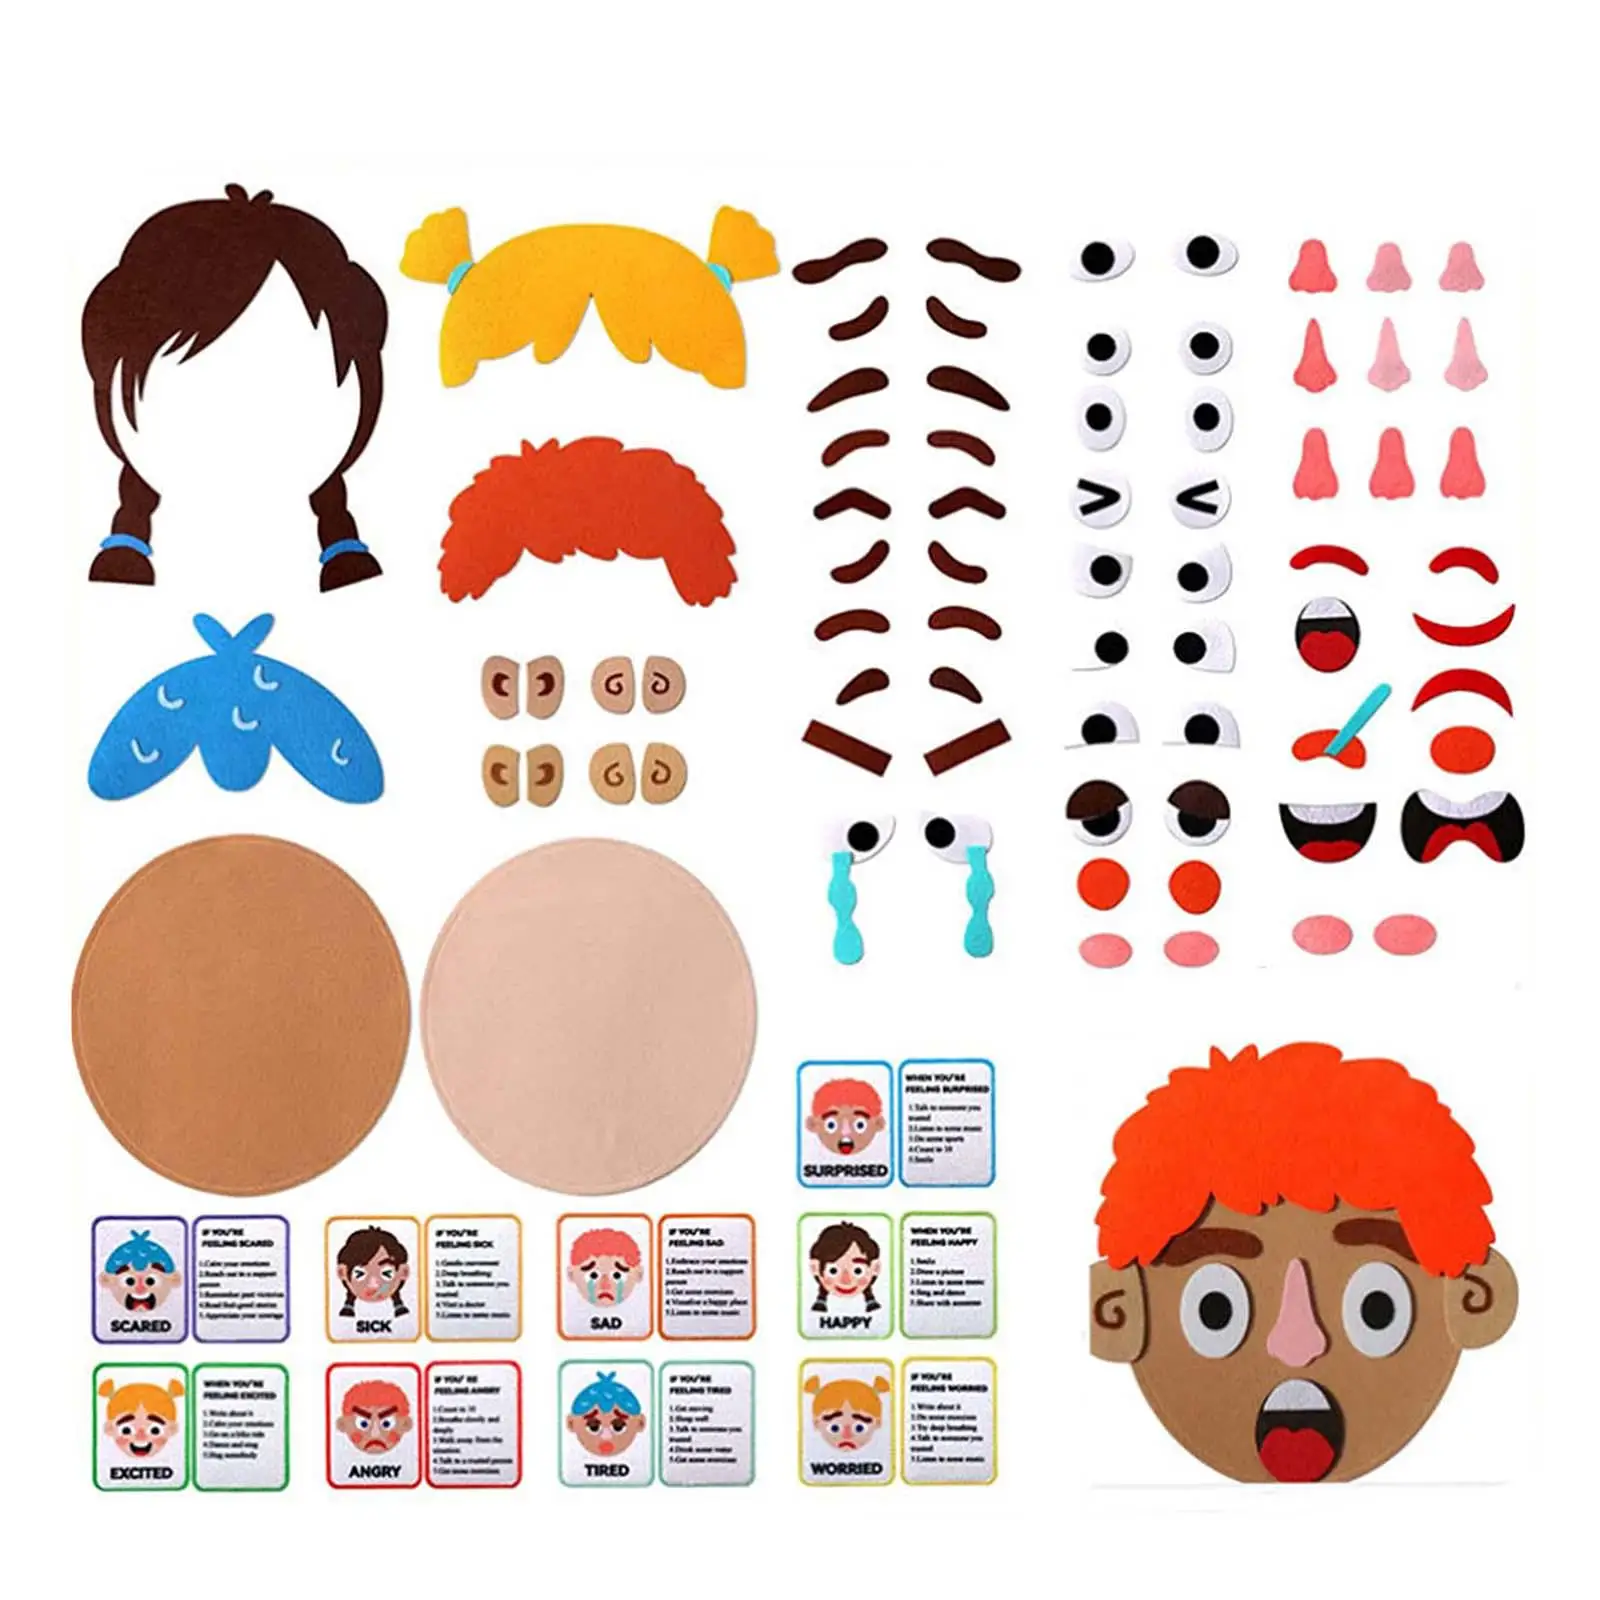 Kids Social Emotional Learning Learning Social Skills Learn about Emotions Make A Funny Faces Stickers Games for Children Boys